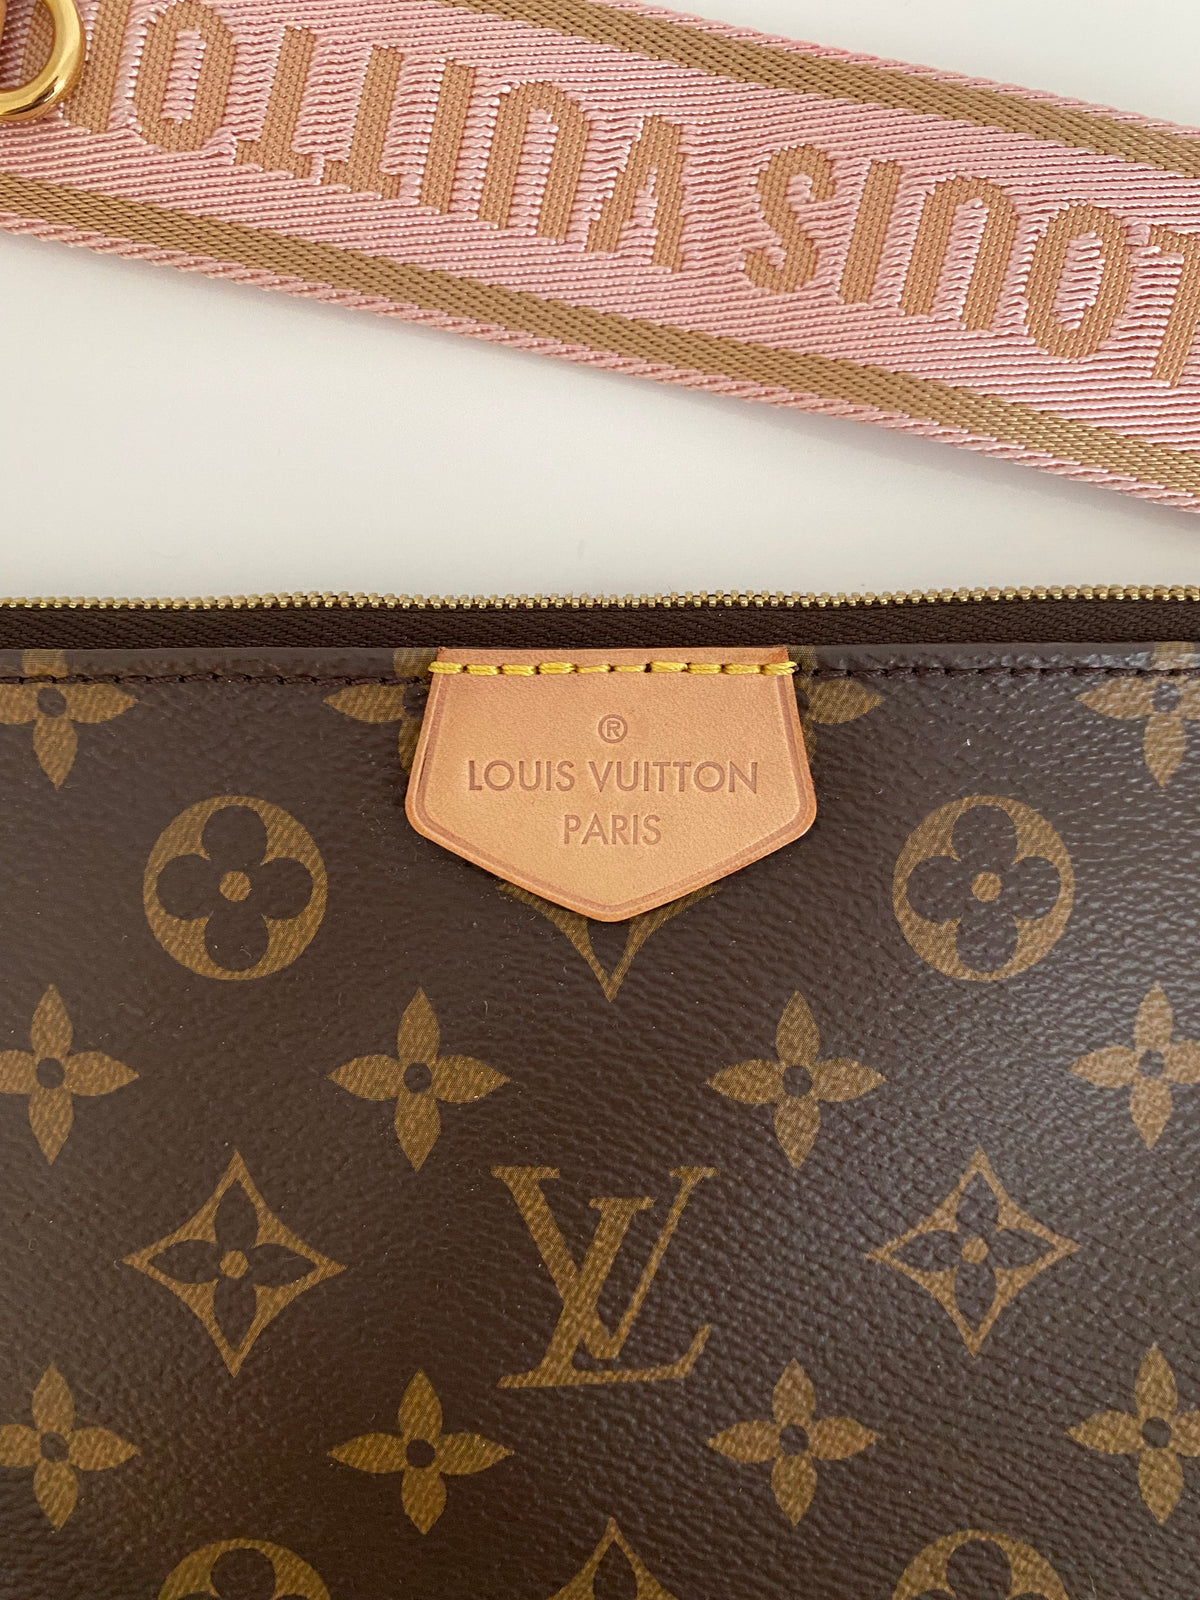 Whats your most used crossbody LV? Thanks for sharing. : r/Louisvuitton